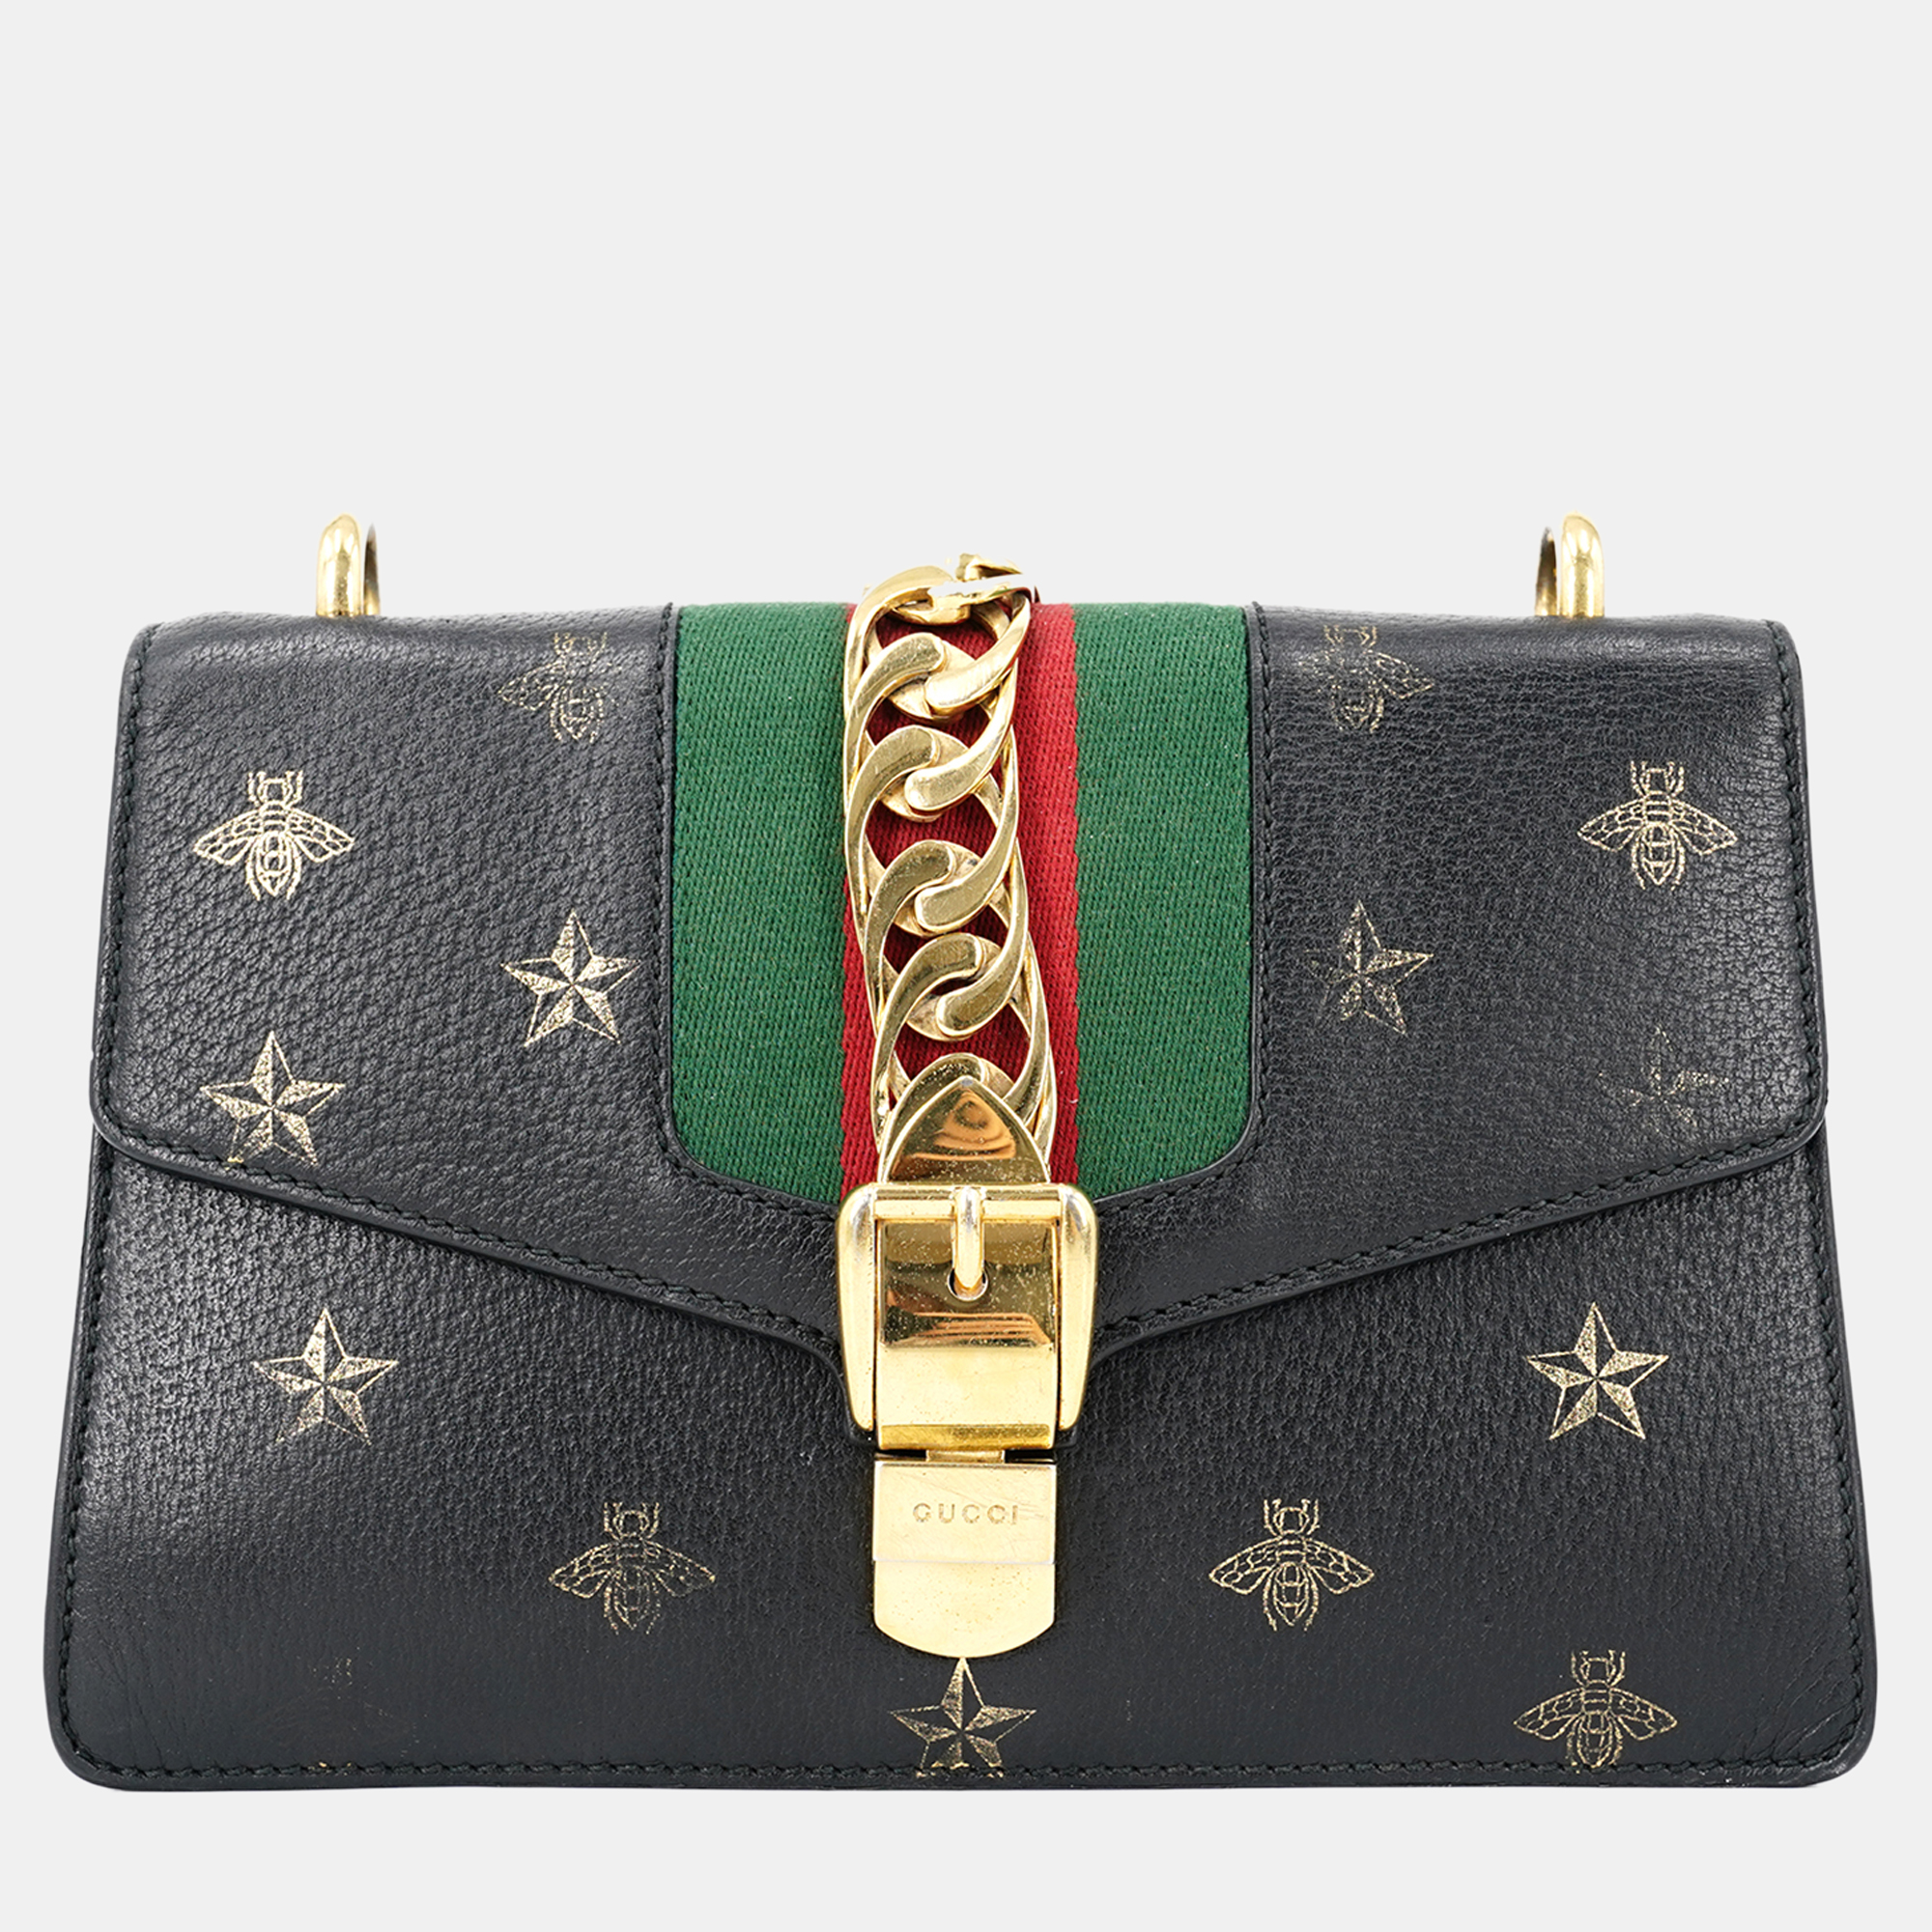 Gucci black leather small sylvie bee star shoulder bag